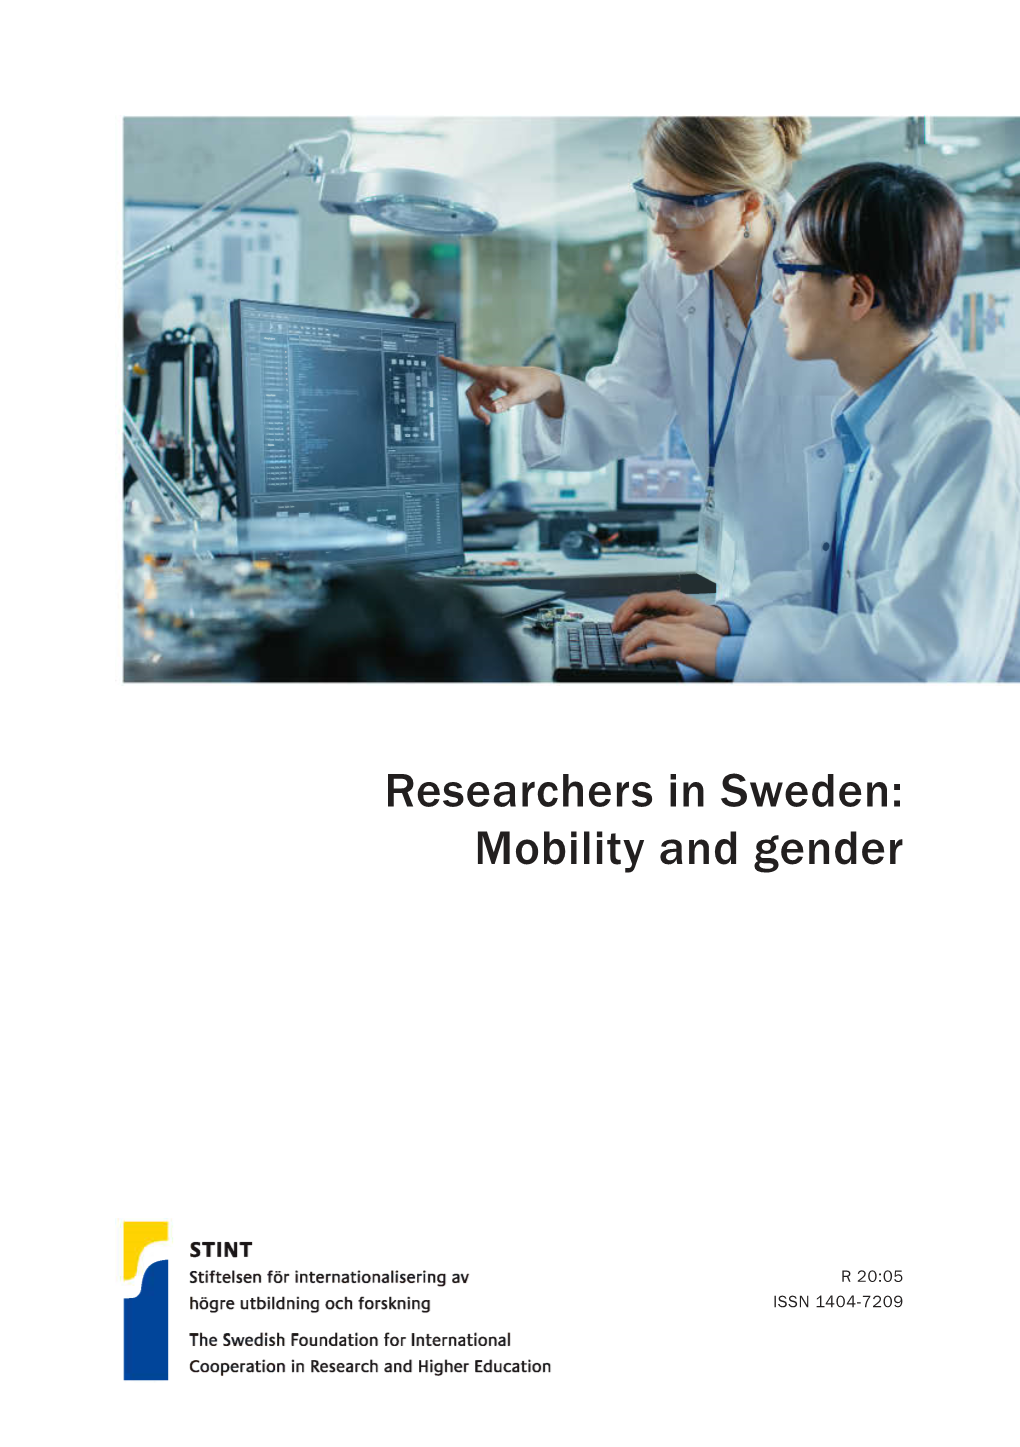 Mobility and Gender